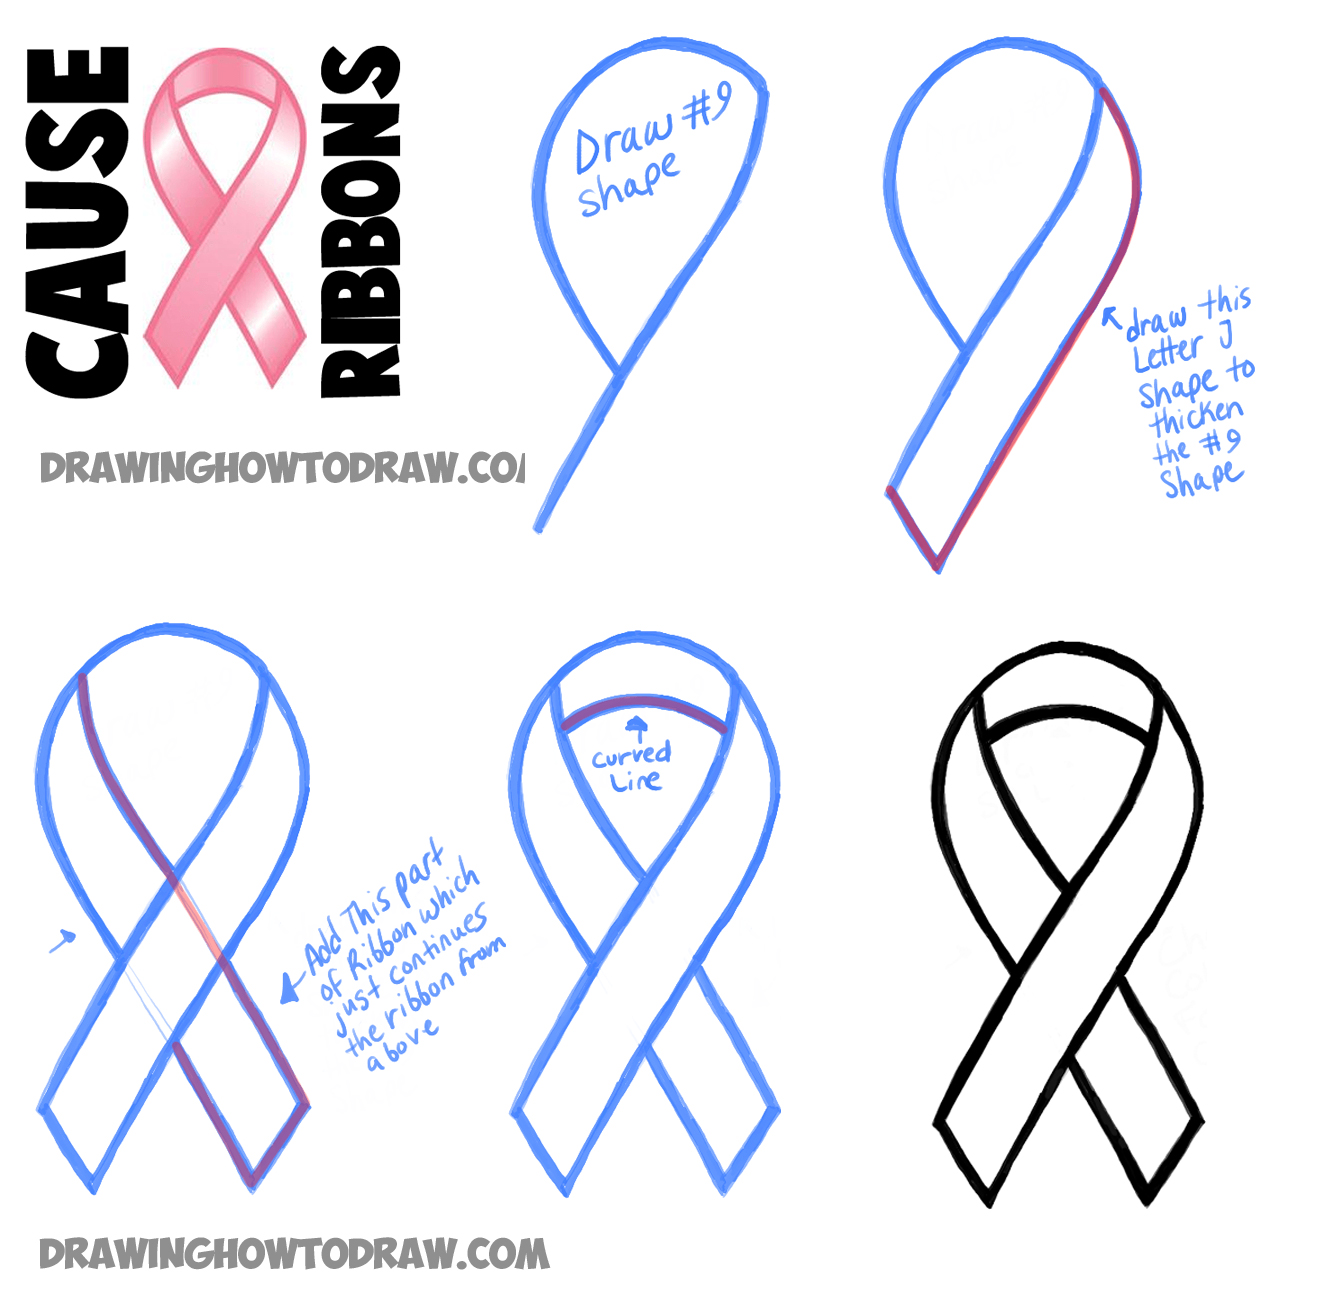 how-to-draw-awareness-ribbons-for-causes-such-as-breast-cancer-and